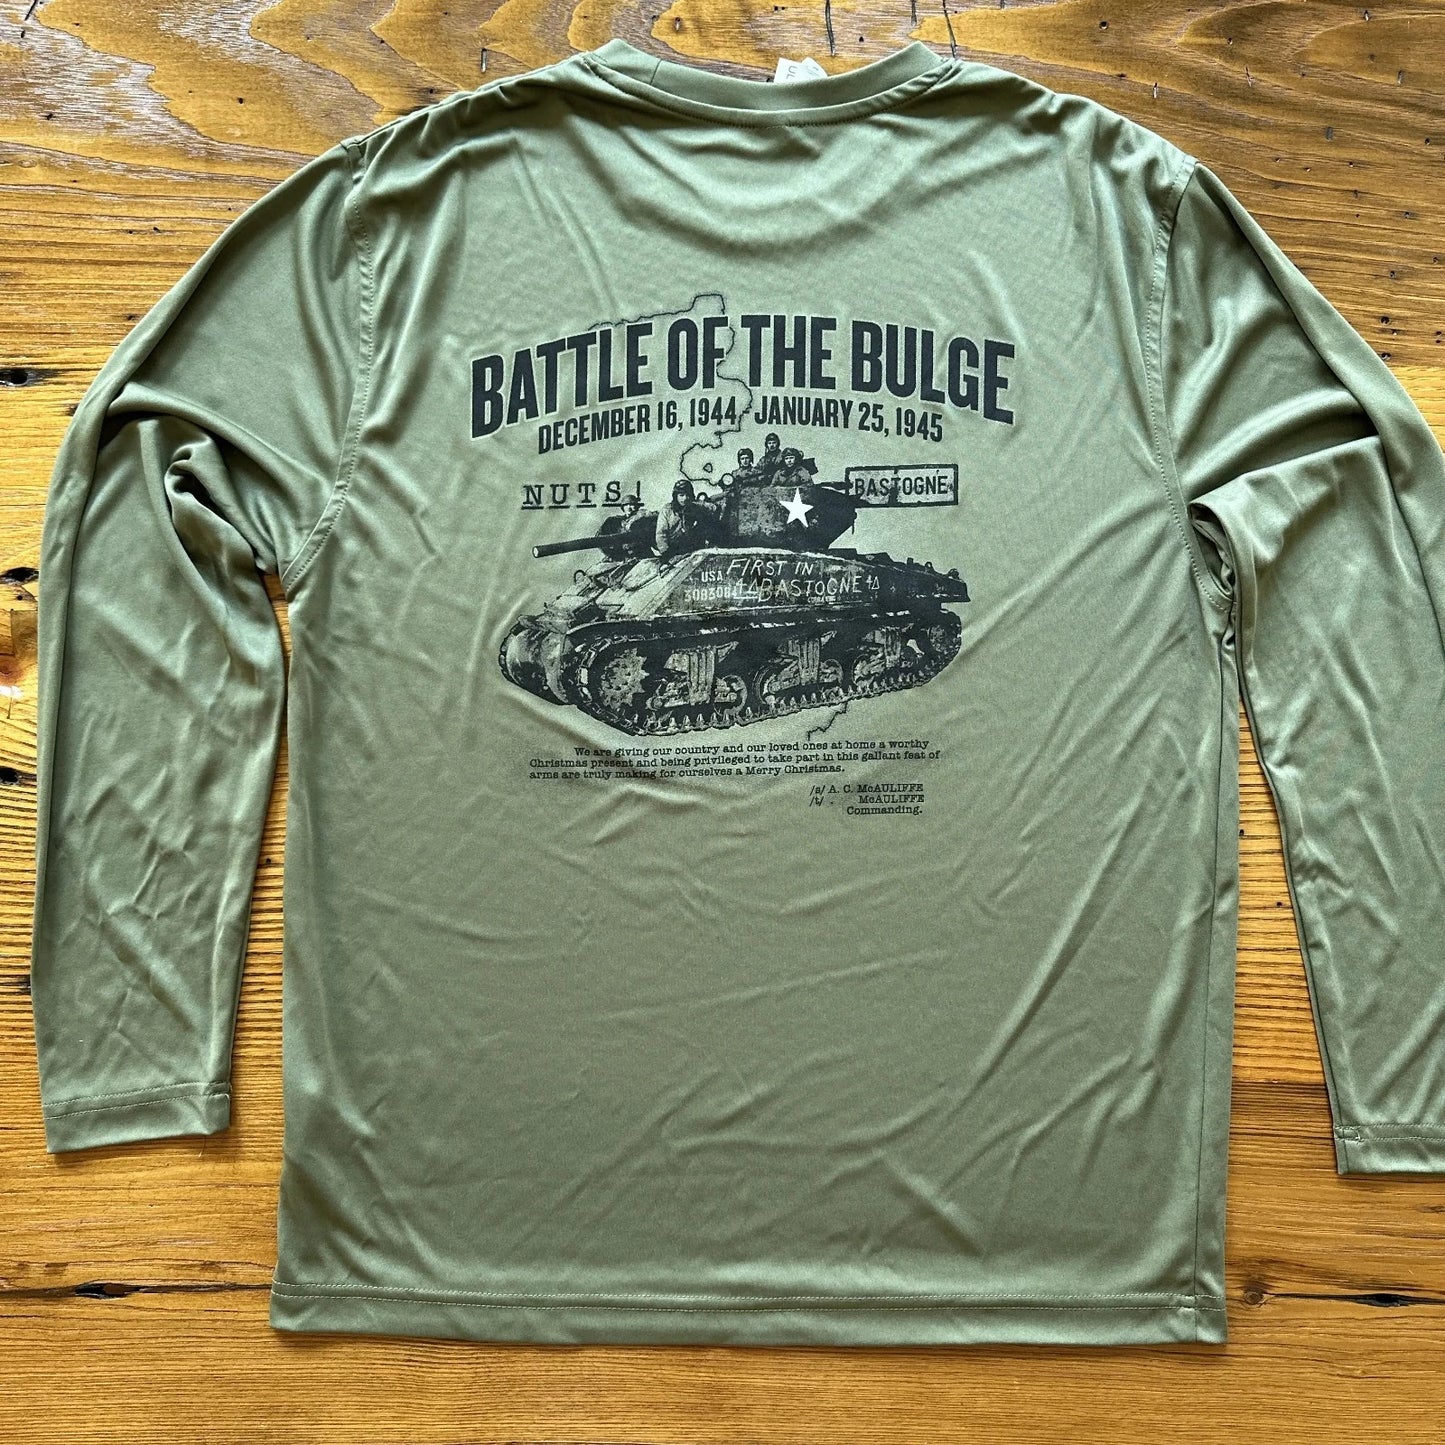 Back of The Battle of the Bulge moisture-wicking UV shirt from The History List store